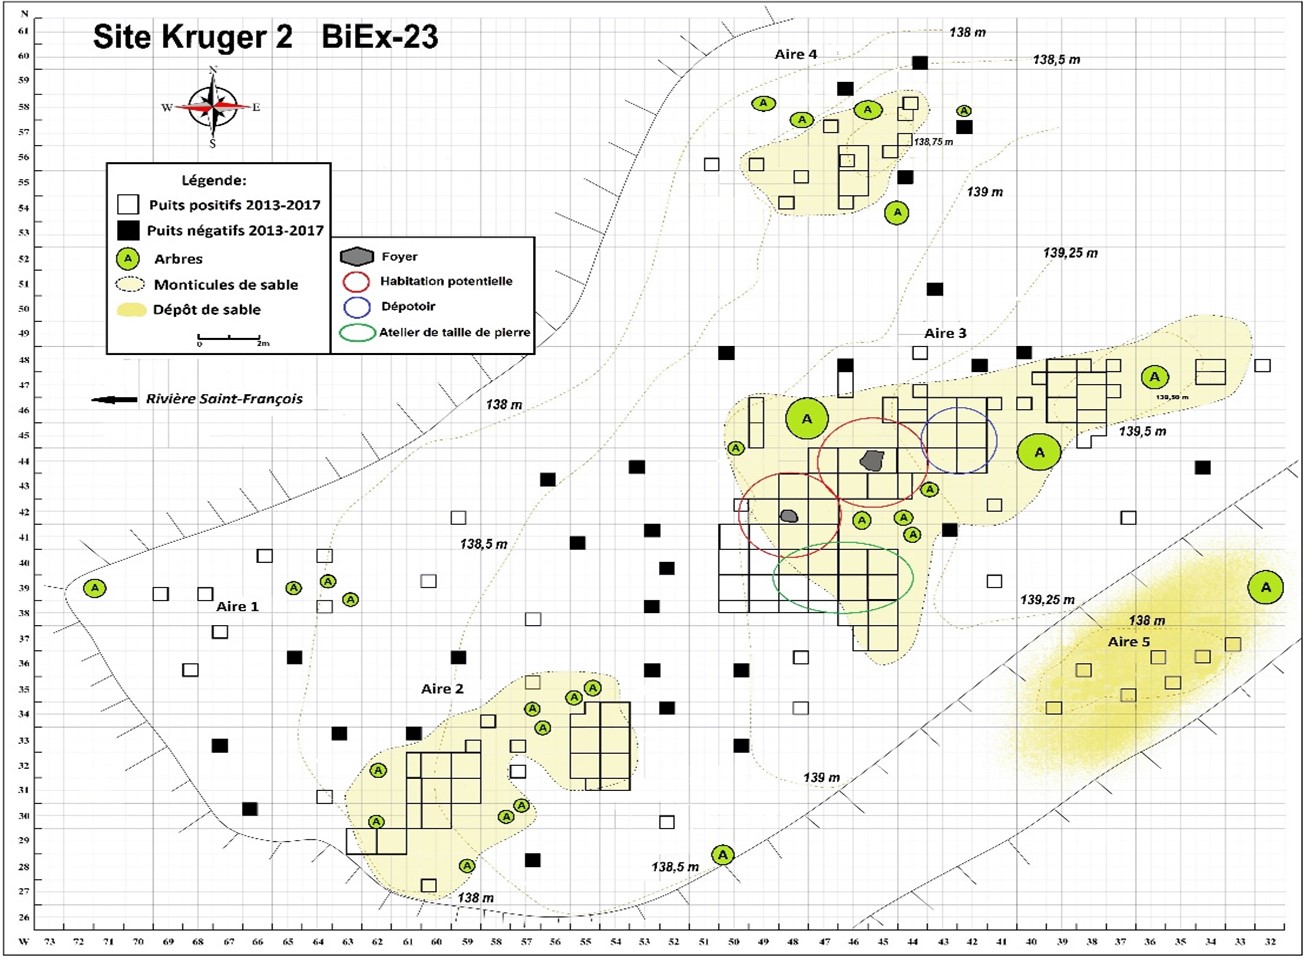 A grid plan of the Kruger 2 BiEx-23 site with the topographical contours of five excavation site areas. The legend’s icons indicate: White squares (positive wells); black squares (negative wells); green circles (trees); and yellow spots (sand deposits).